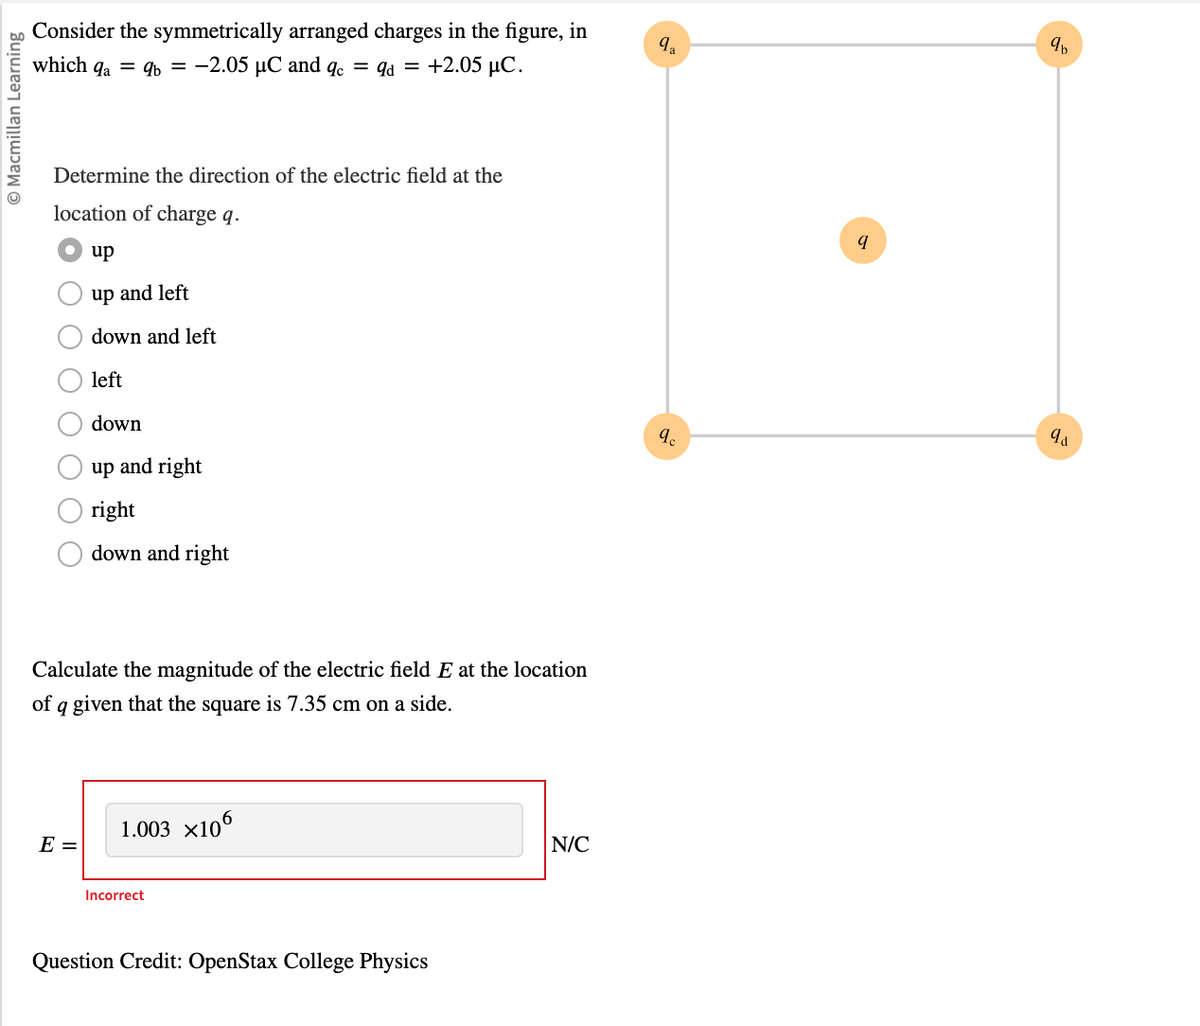 Ⓒ Macmillan Learning
Consider the symmetrically arranged charges in the figure, in
which qa = qb= -2.05 µC and qc = qd = +2.05 µC.
Determine
location of charge q.
up
up and left
down and left
left
down
the direction of the electric field at the
E =
up and right
right
down and right
Calculate the magnitude of the electric field E at the location
of a given that the square is 7.35 cm on a side.
1.003 ×106
Incorrect
Question Credit: OpenStax College Physics
N/C
qa
9c
q
9b
qa